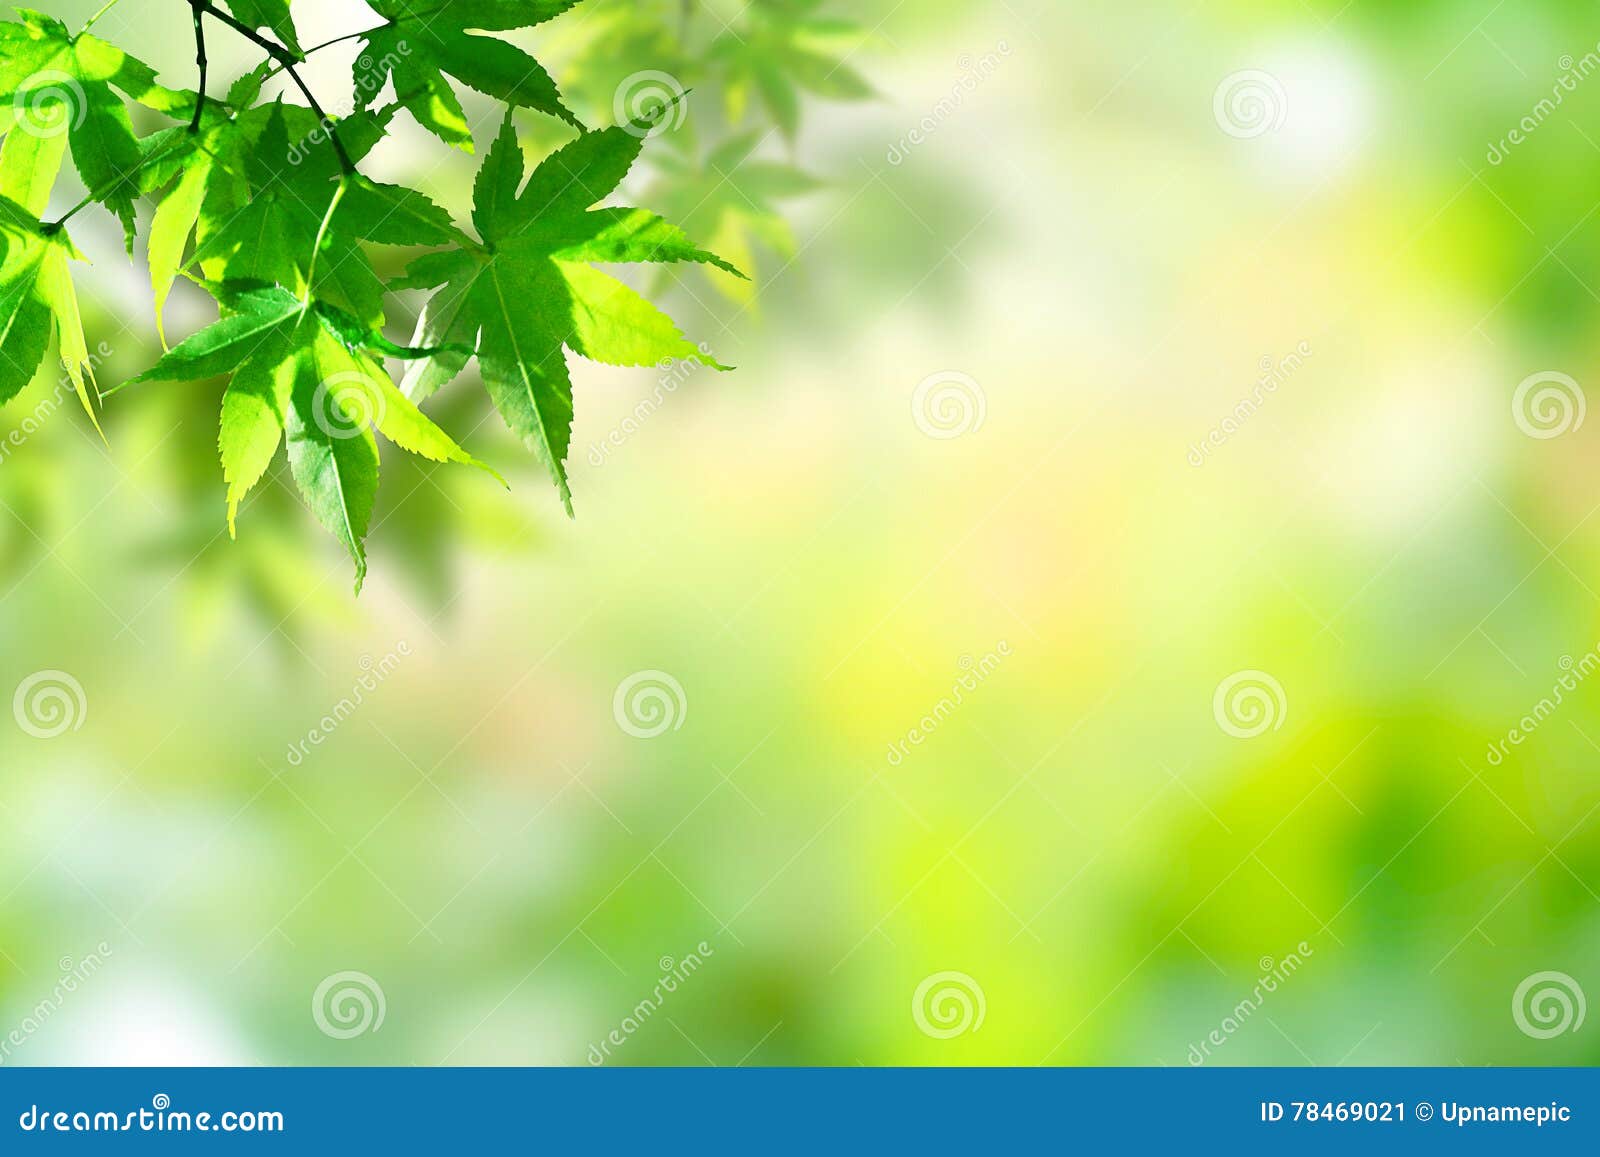 Maple Green Leaf and Blur Background. Stock Image - Image of leaf, empty:  78469021